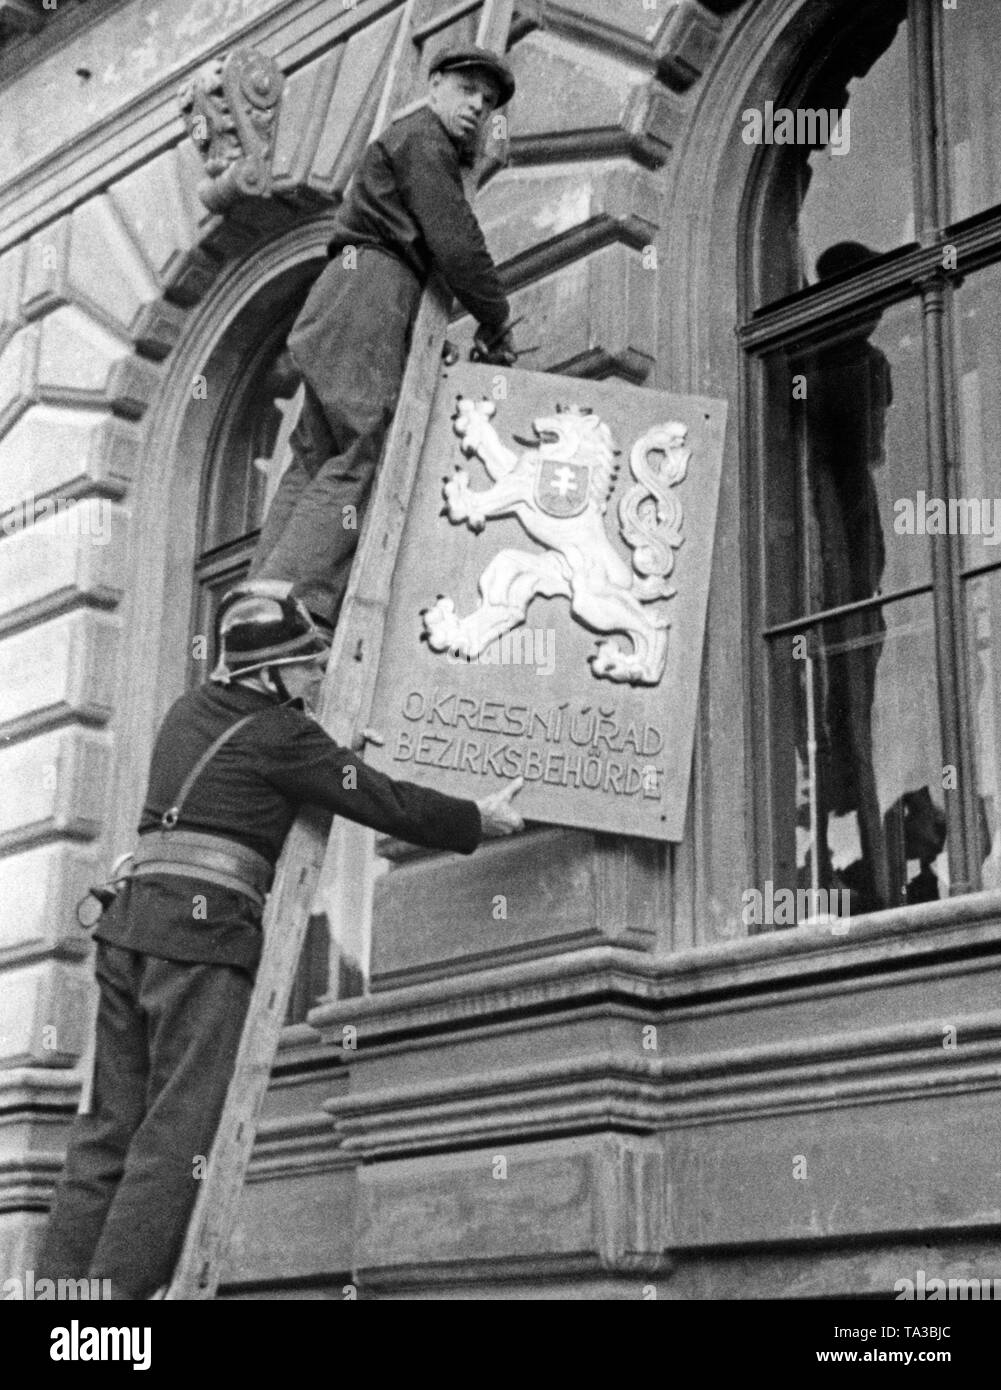 The Czech coats of arms at the town hall in Prachatitz (today Prachatice) are being removed on October 10, 1938. Stock Photo